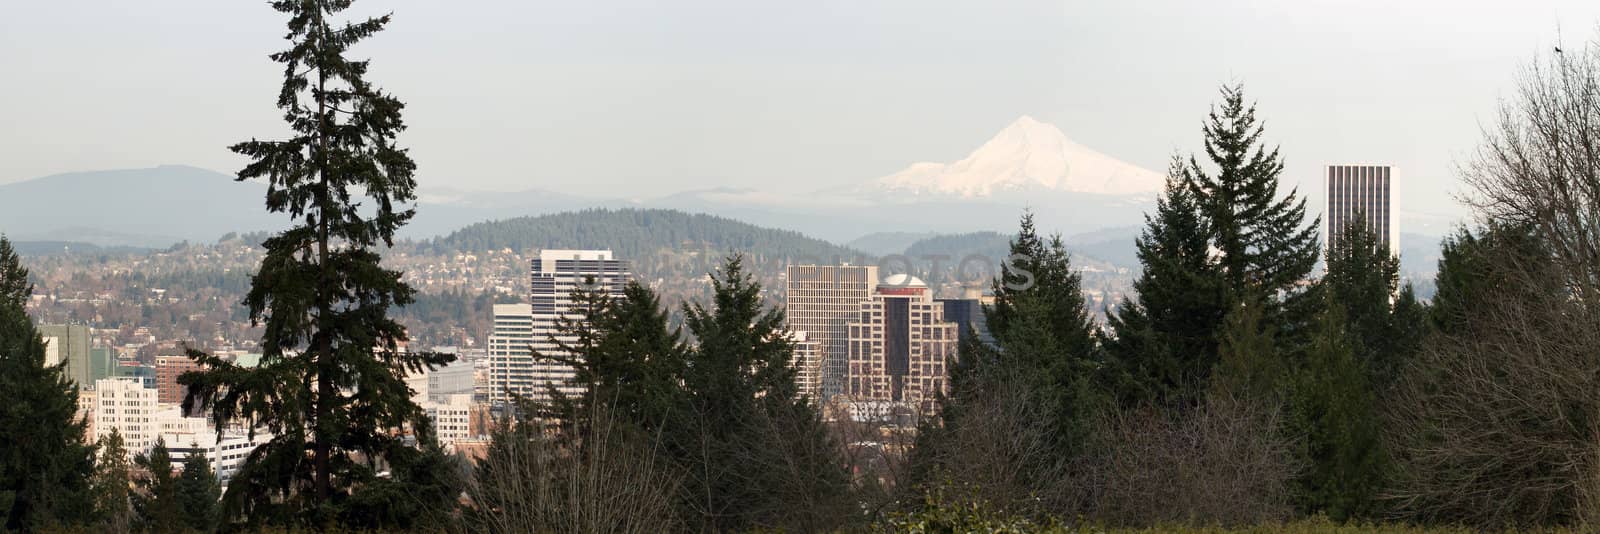 Portland Oregon Downtown Cityscape Amongst the Trees with Mount Hood Panorama